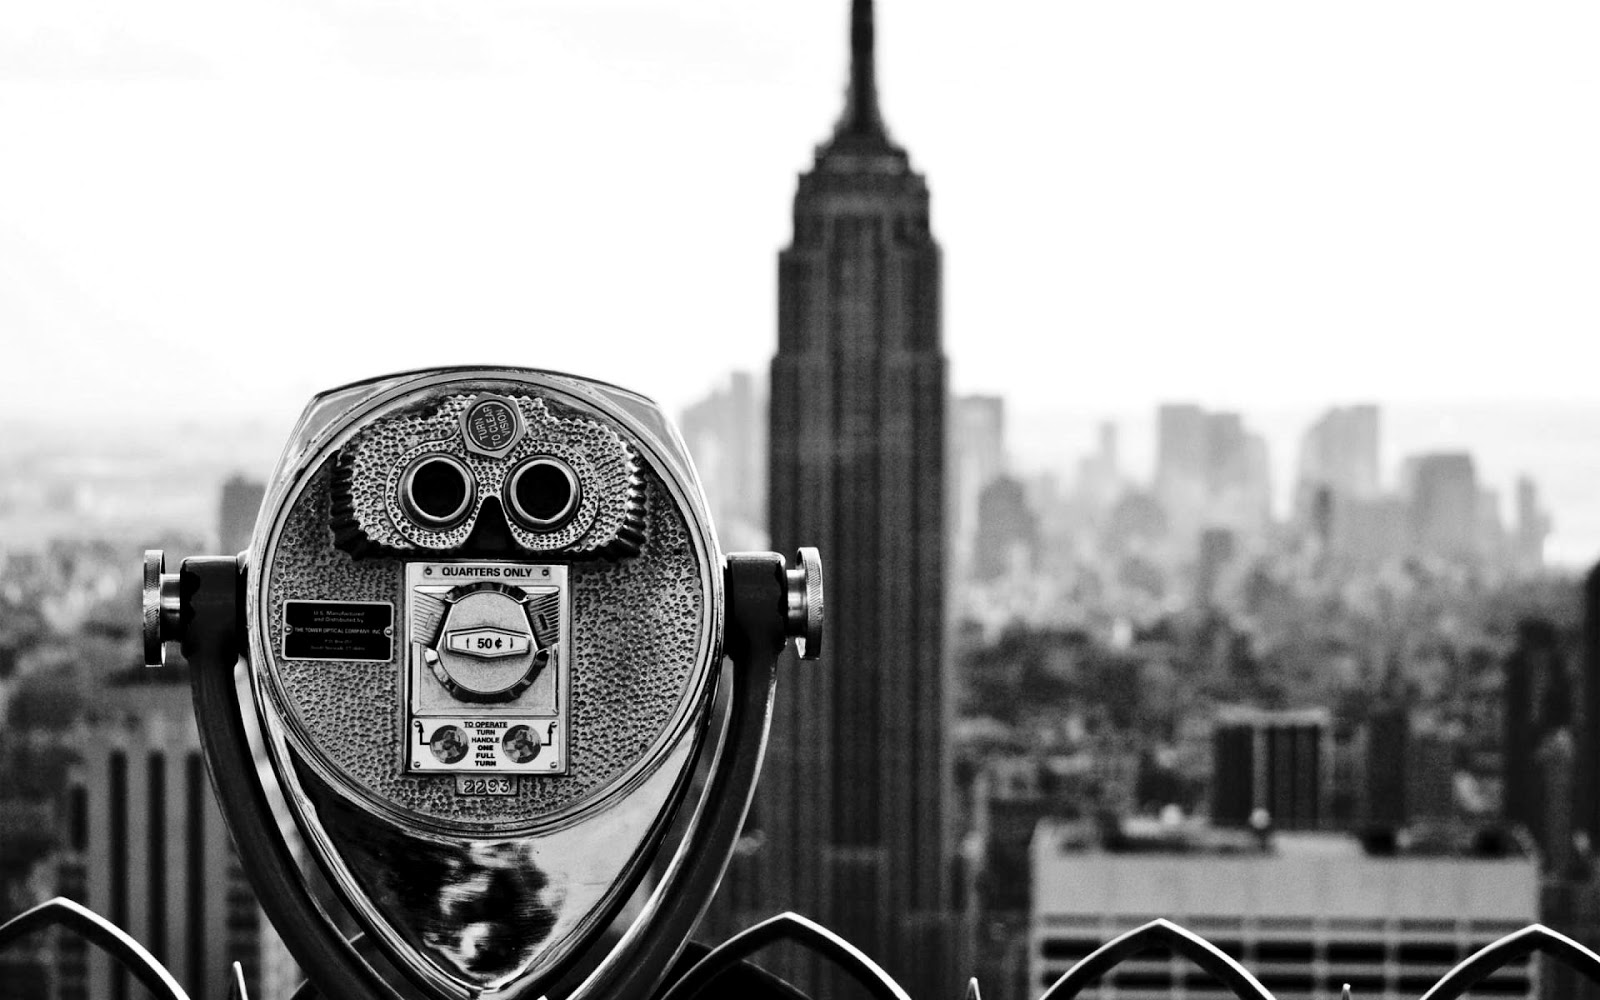 25 Best New York City Photography Images